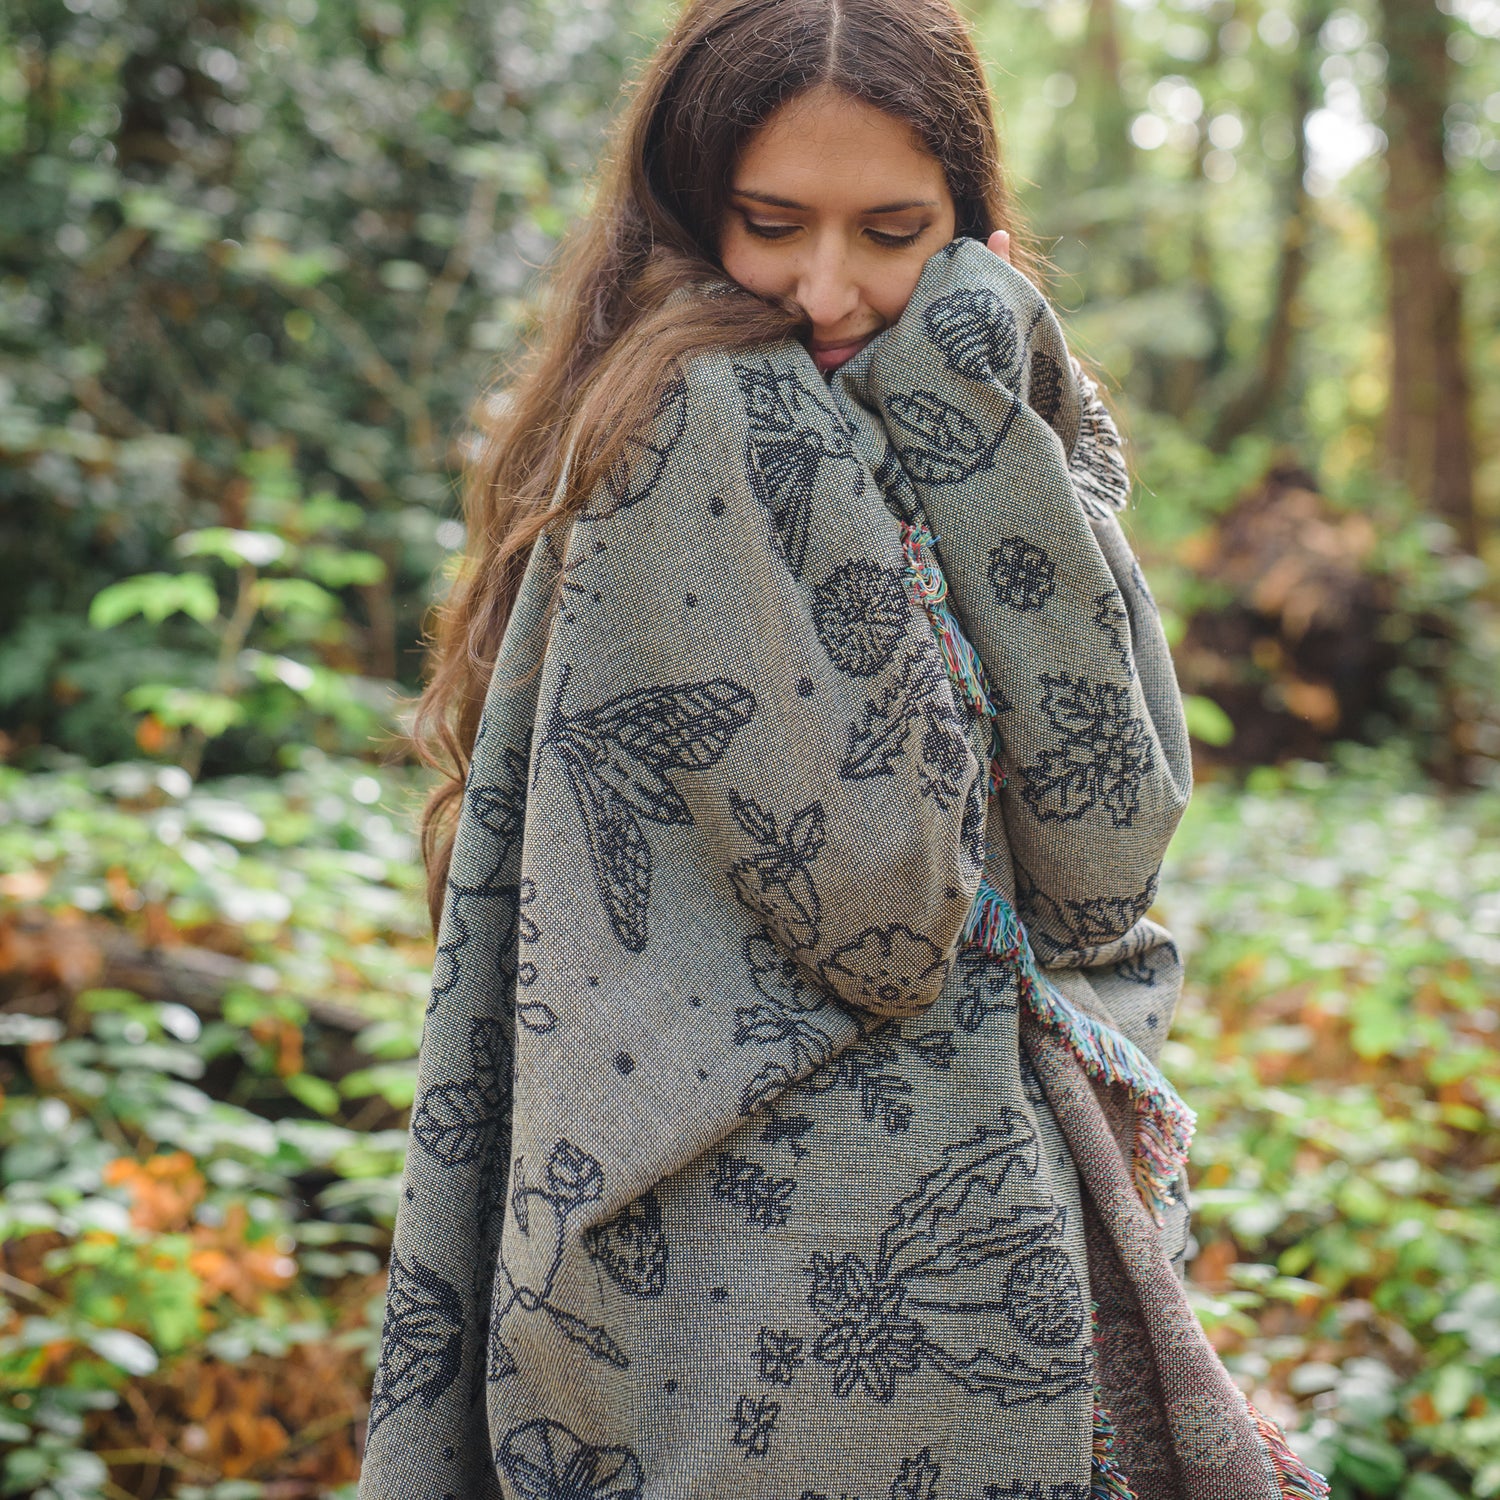 Pretty grey blanket with black pattern of moths, berries, leaves and flowers wraped around a woman in the woods